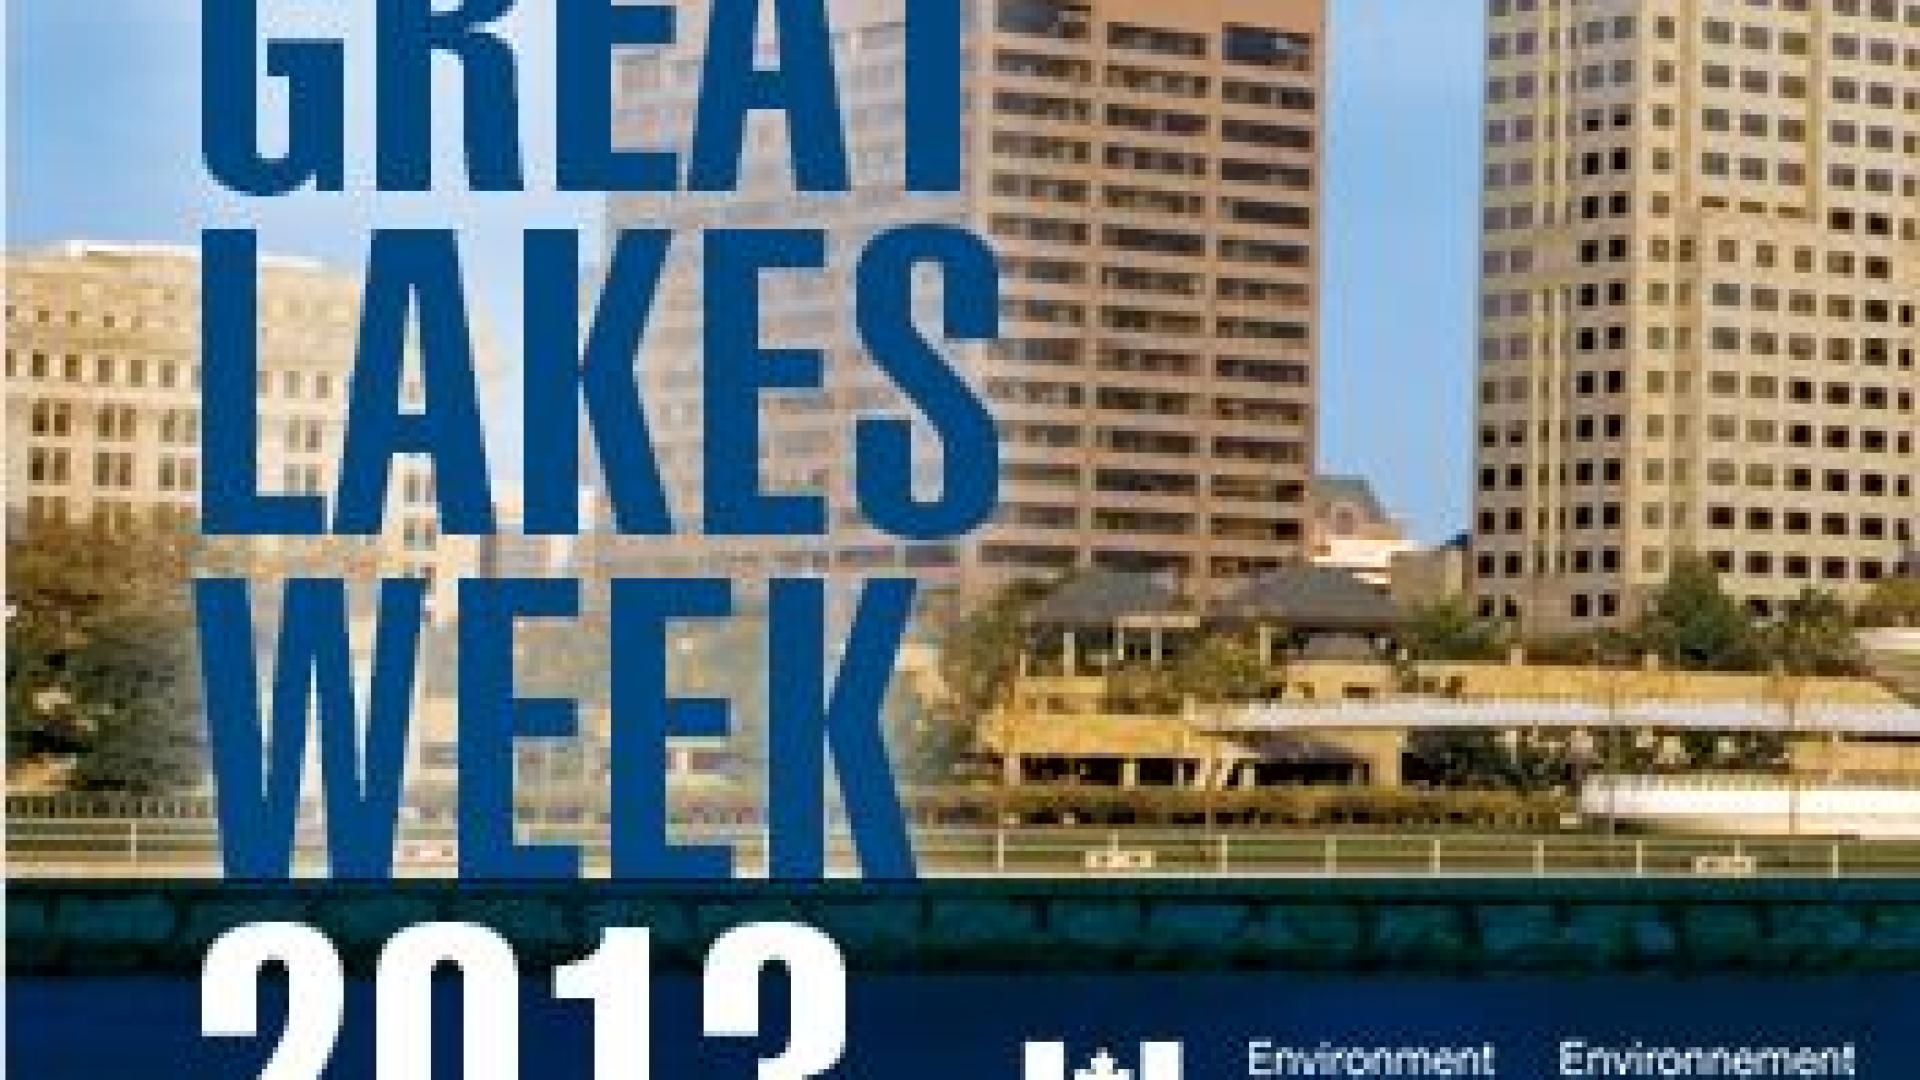 IJC ‘Firsts’ for Great Lakes Week 2013